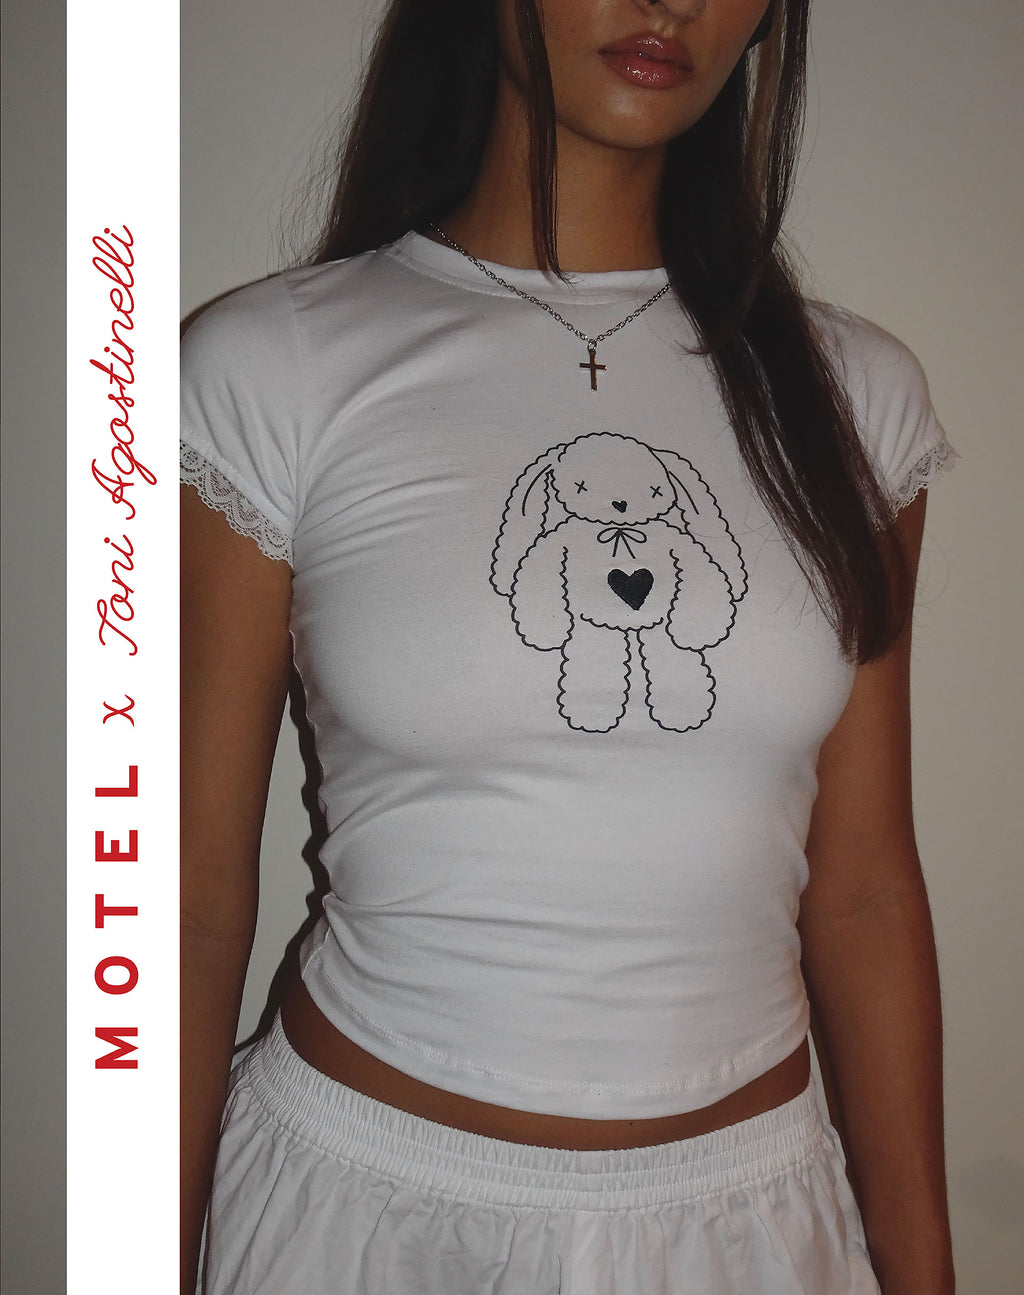 MOTEL X Toni Agost Tattoo Izzy Tee in White with Heart Bunny Motif